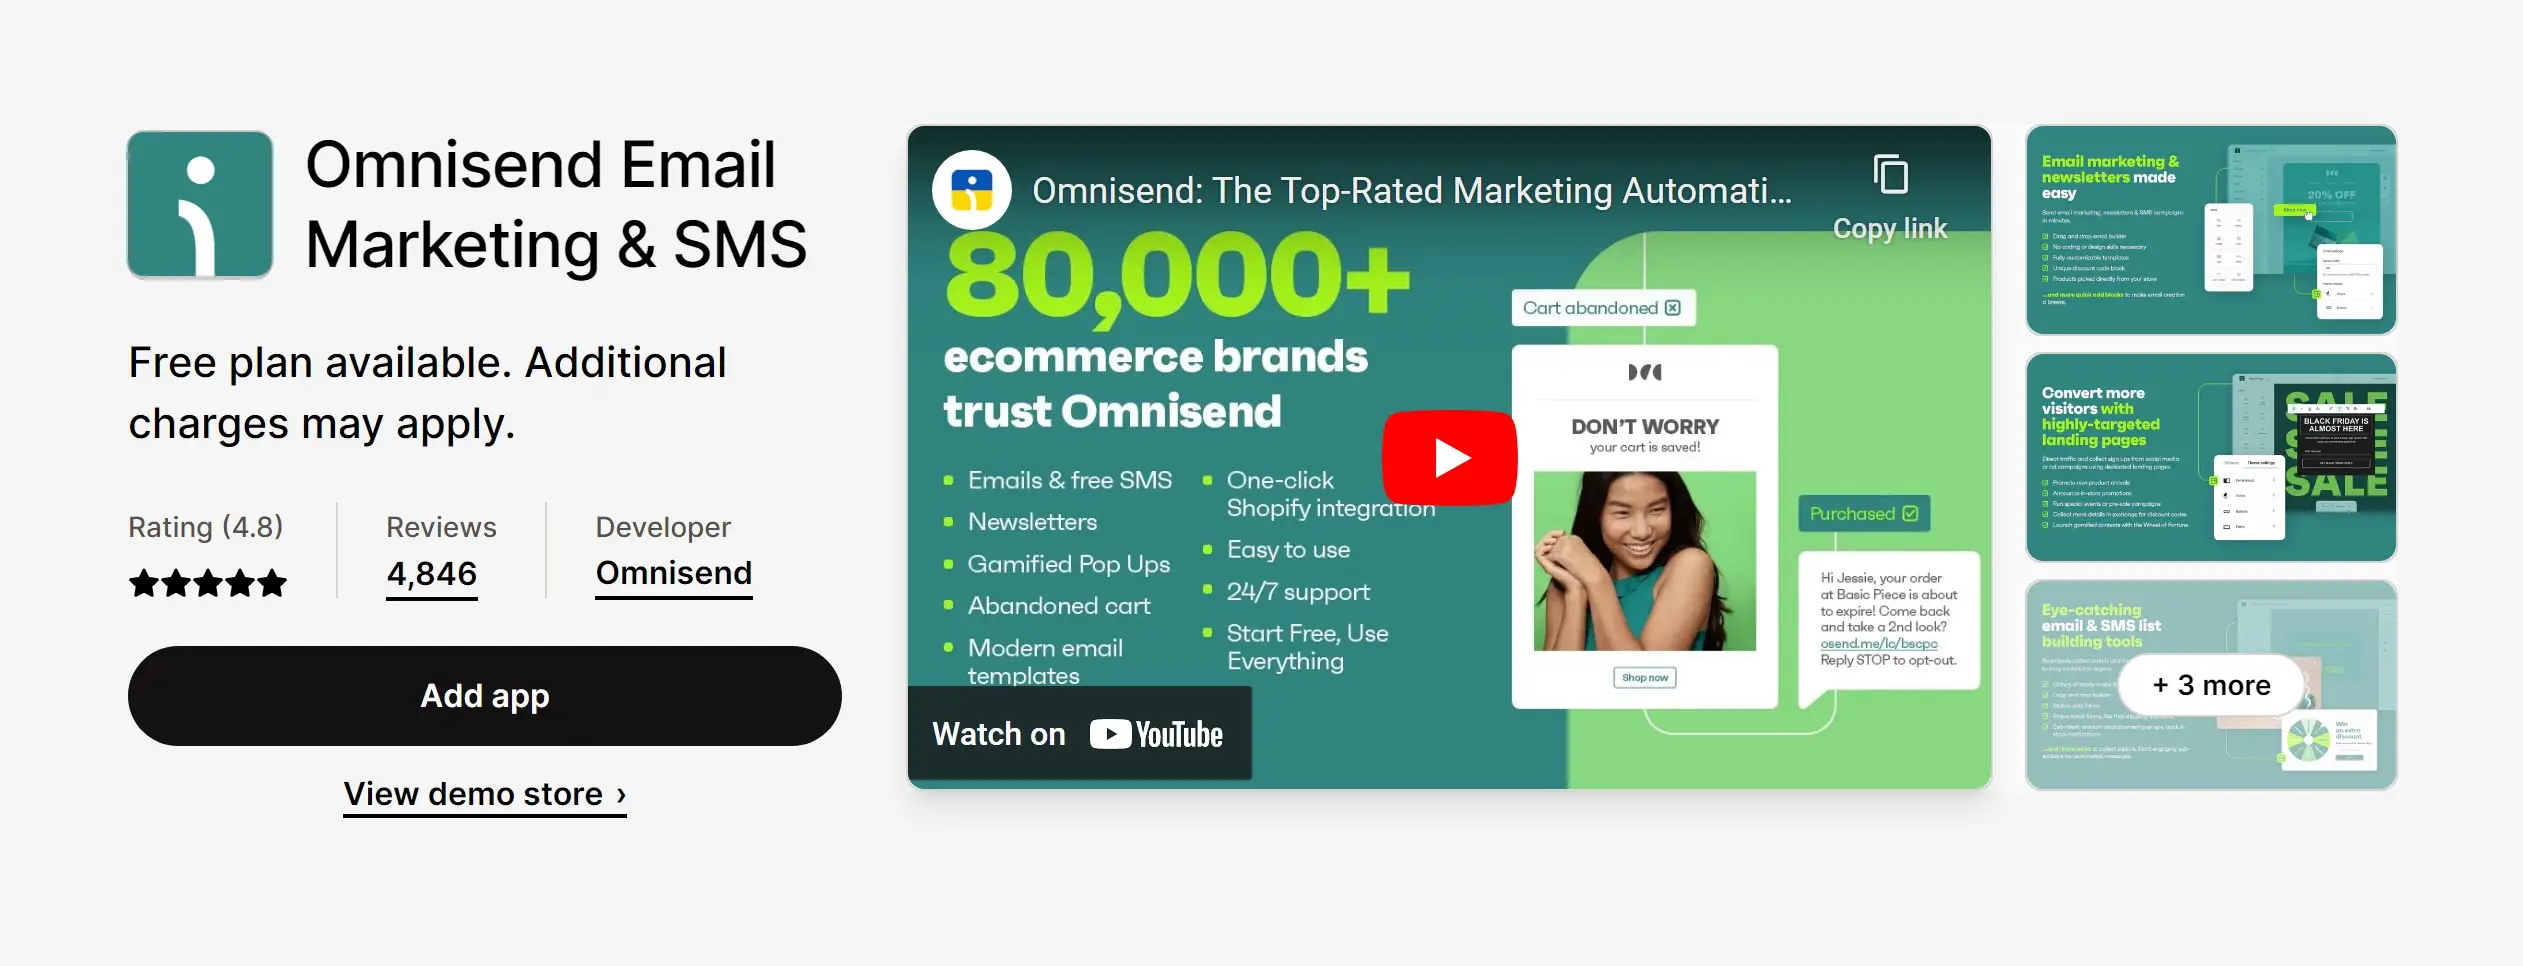 Omnisend is one of the best Shopify apps that is trusted by thousands of merchants